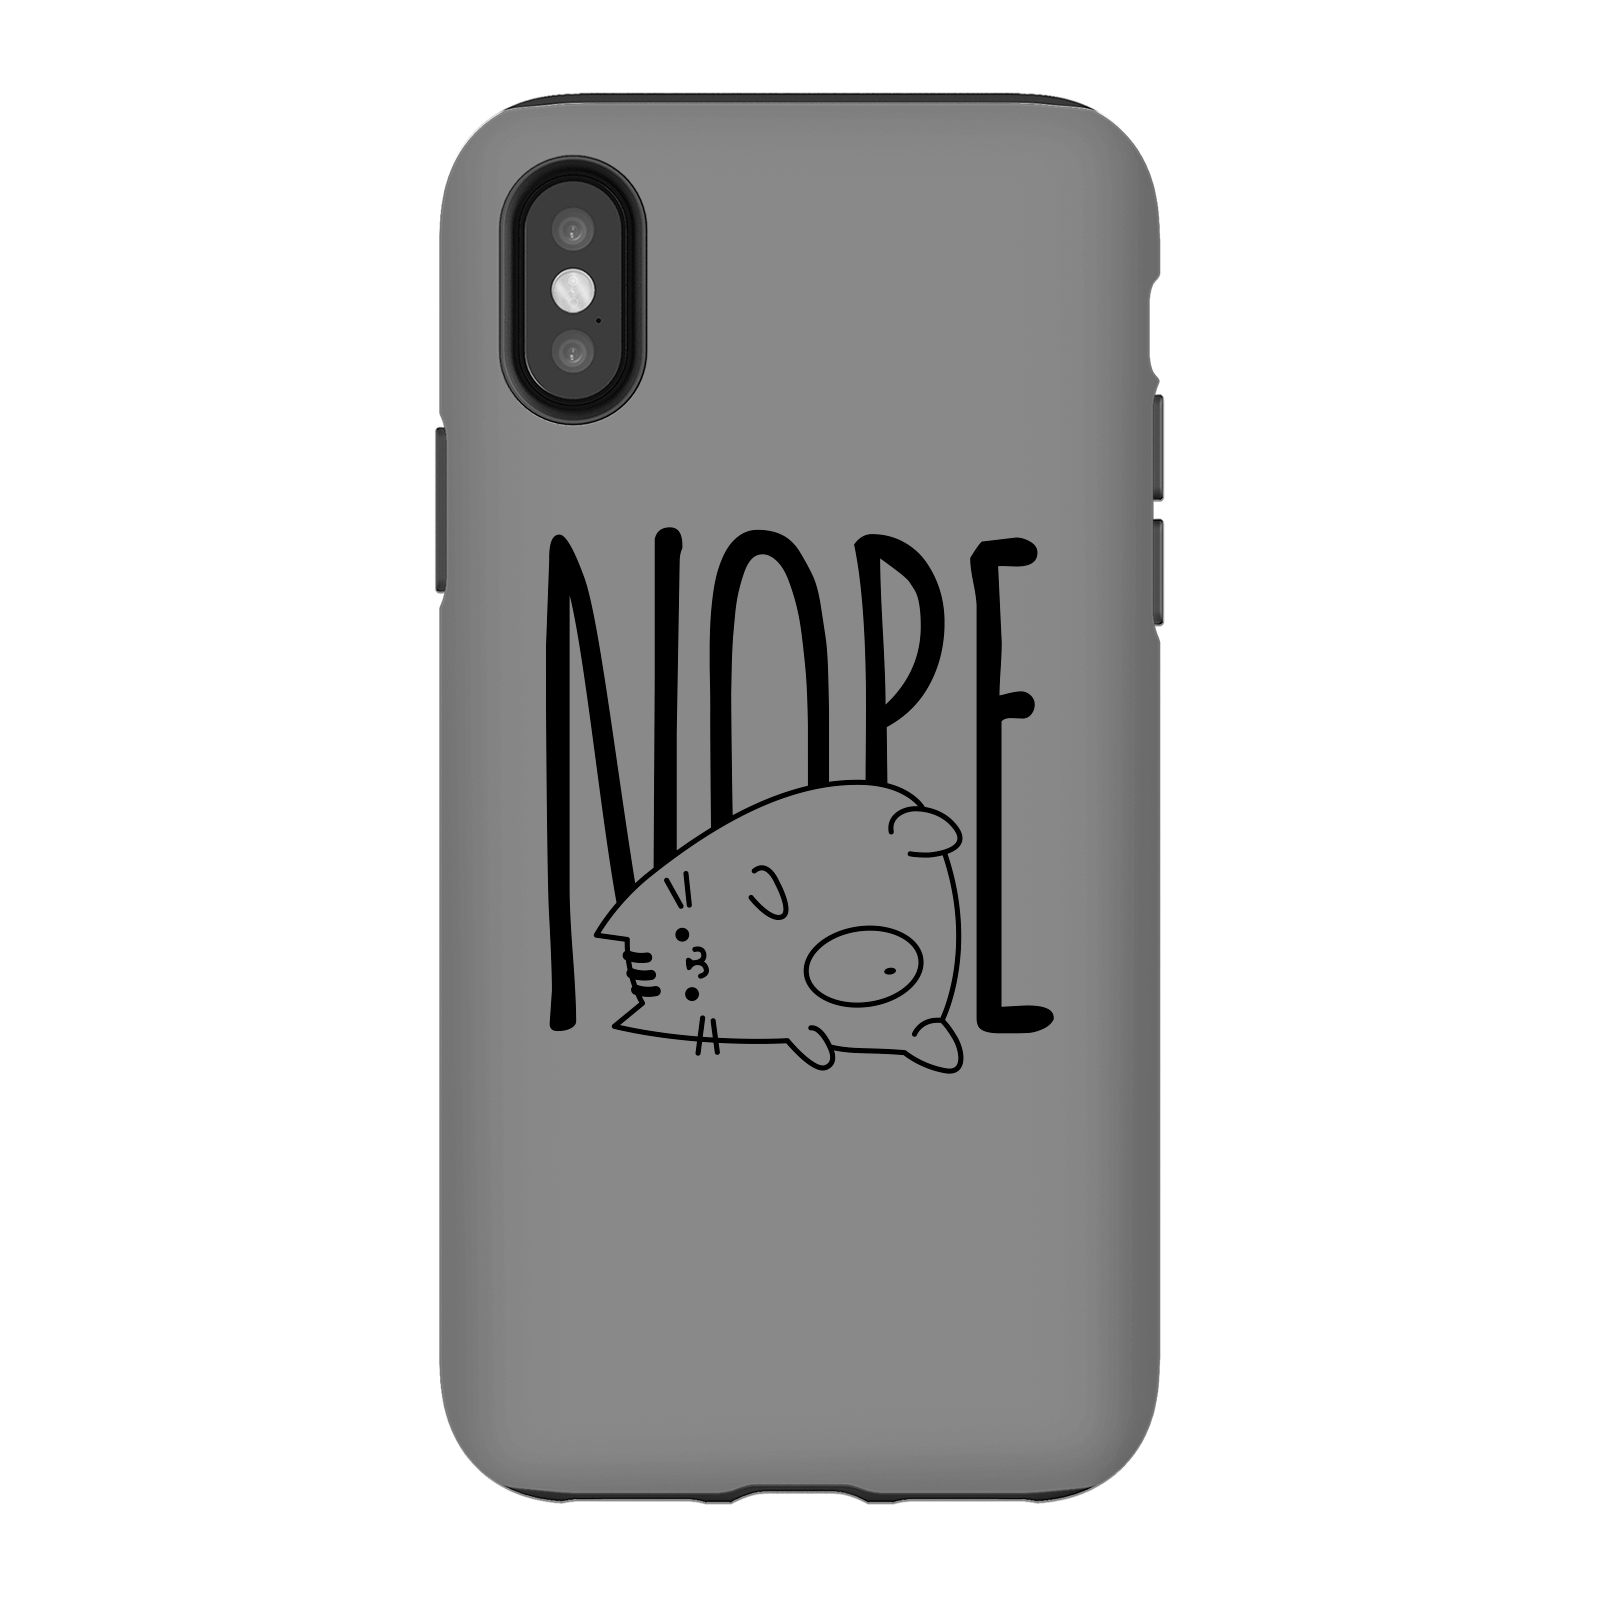 Nope Phone Case for iPhone and Android - iPhone X - Tough Case - Matte